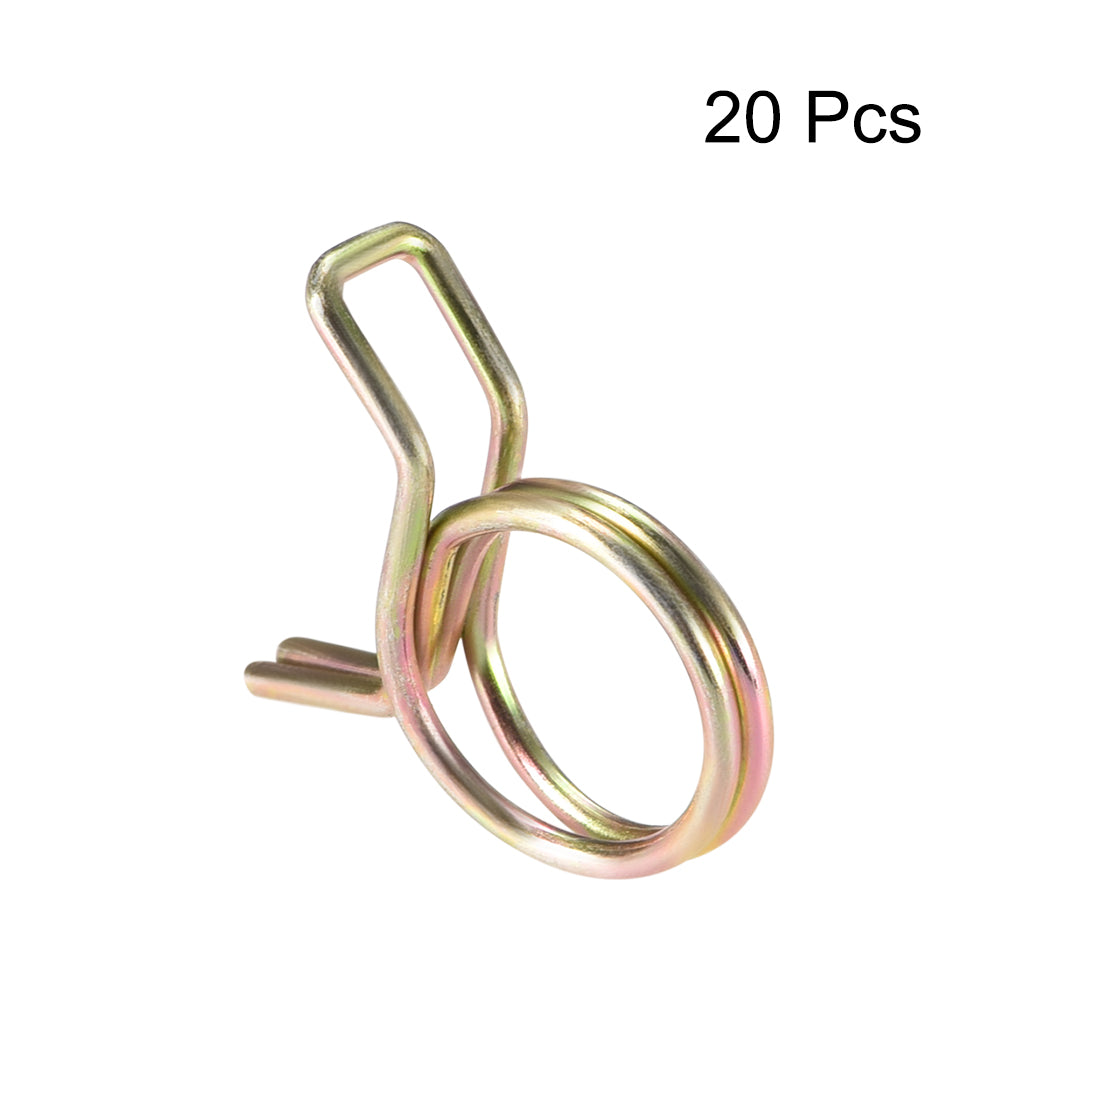 uxcell Uxcell Double Wire Spring Hose Clamp 10mm Fuel Line Tube Spring Clips Zinc Plated 20Pcs